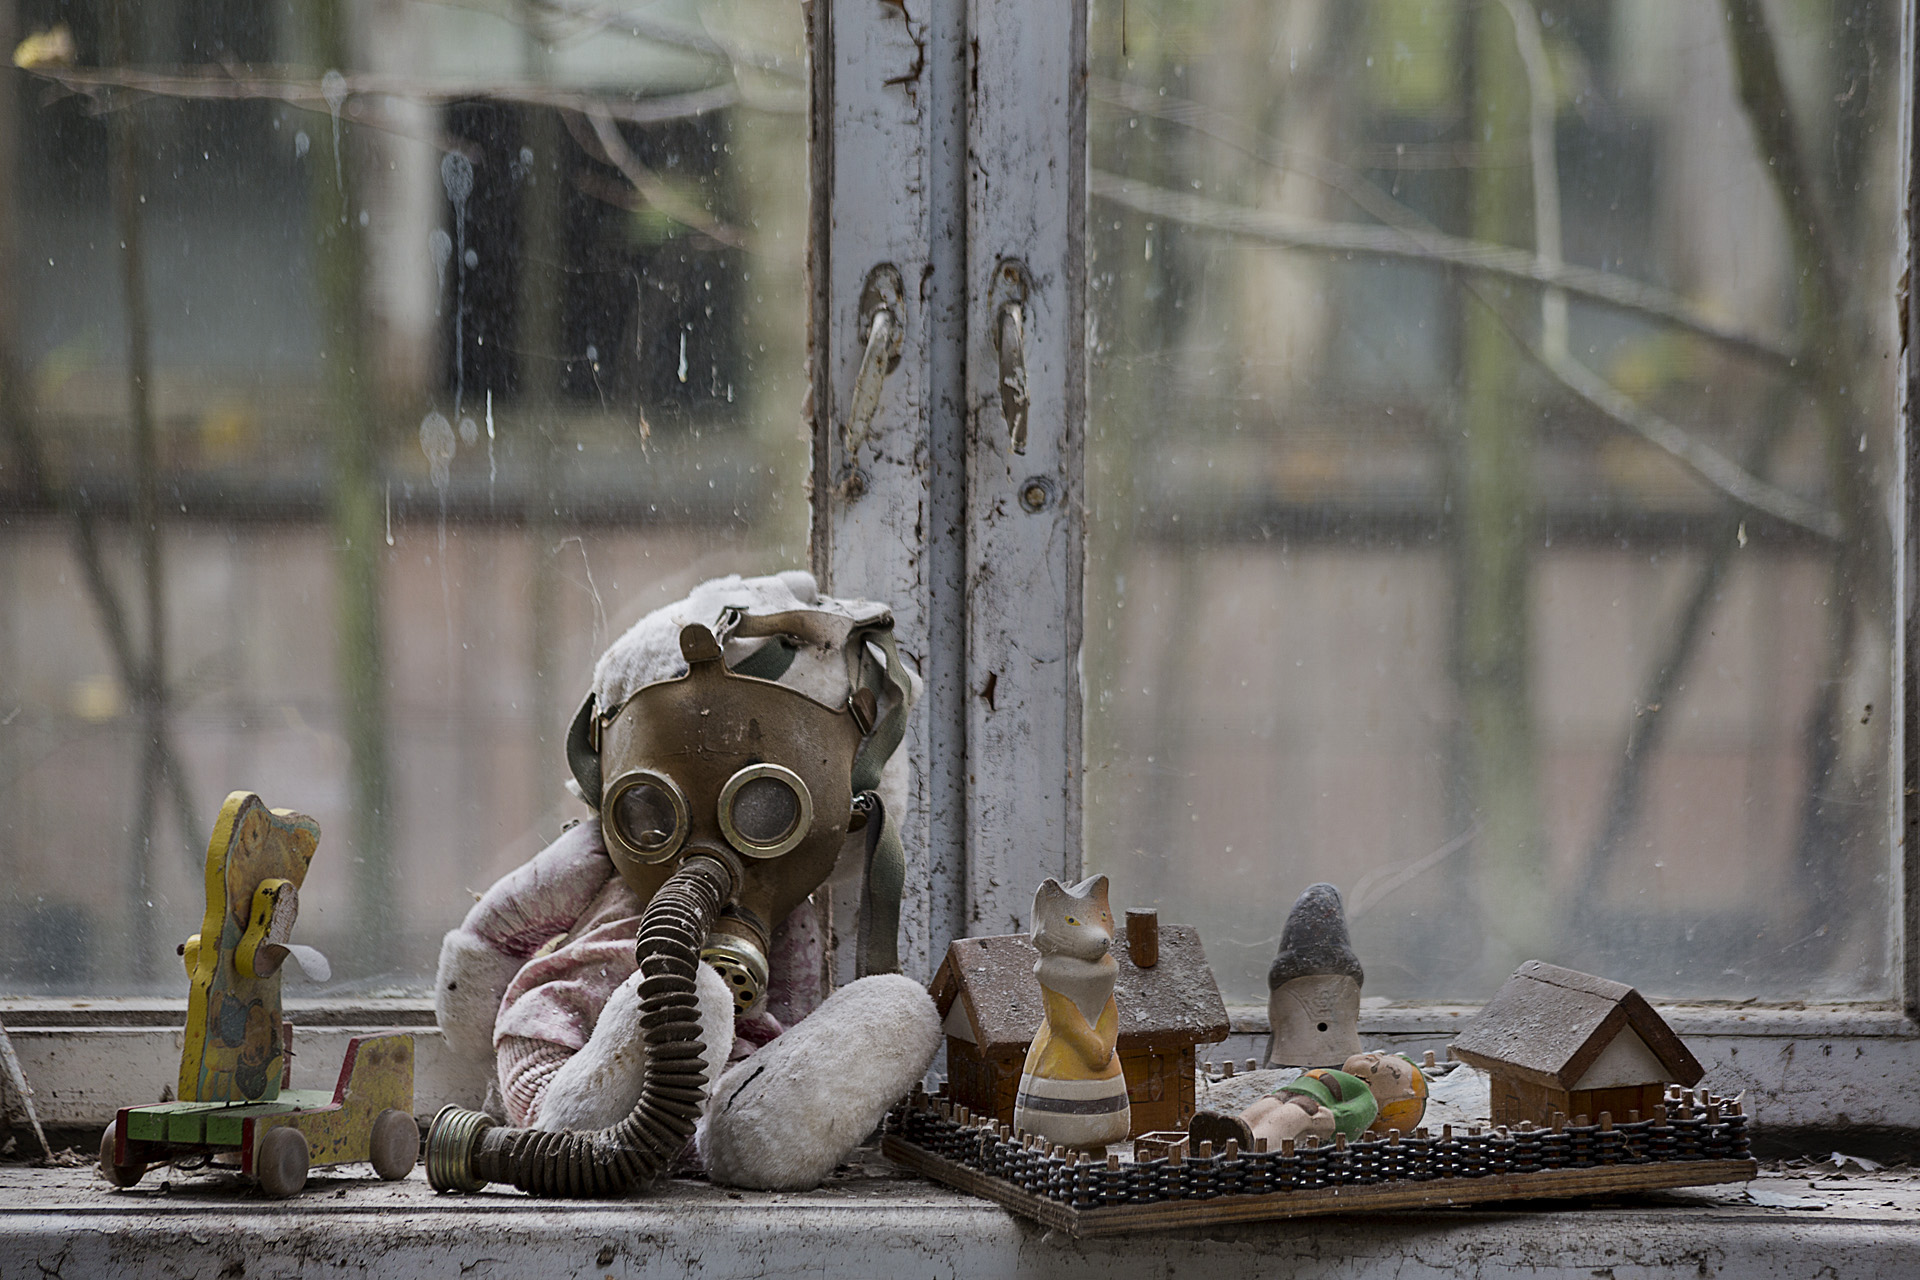  In an abandoned kindergarten children's toys and gas masks create a strange still life. One can suspect that the mix was created intentionally.  Pripyat, Ukraine  